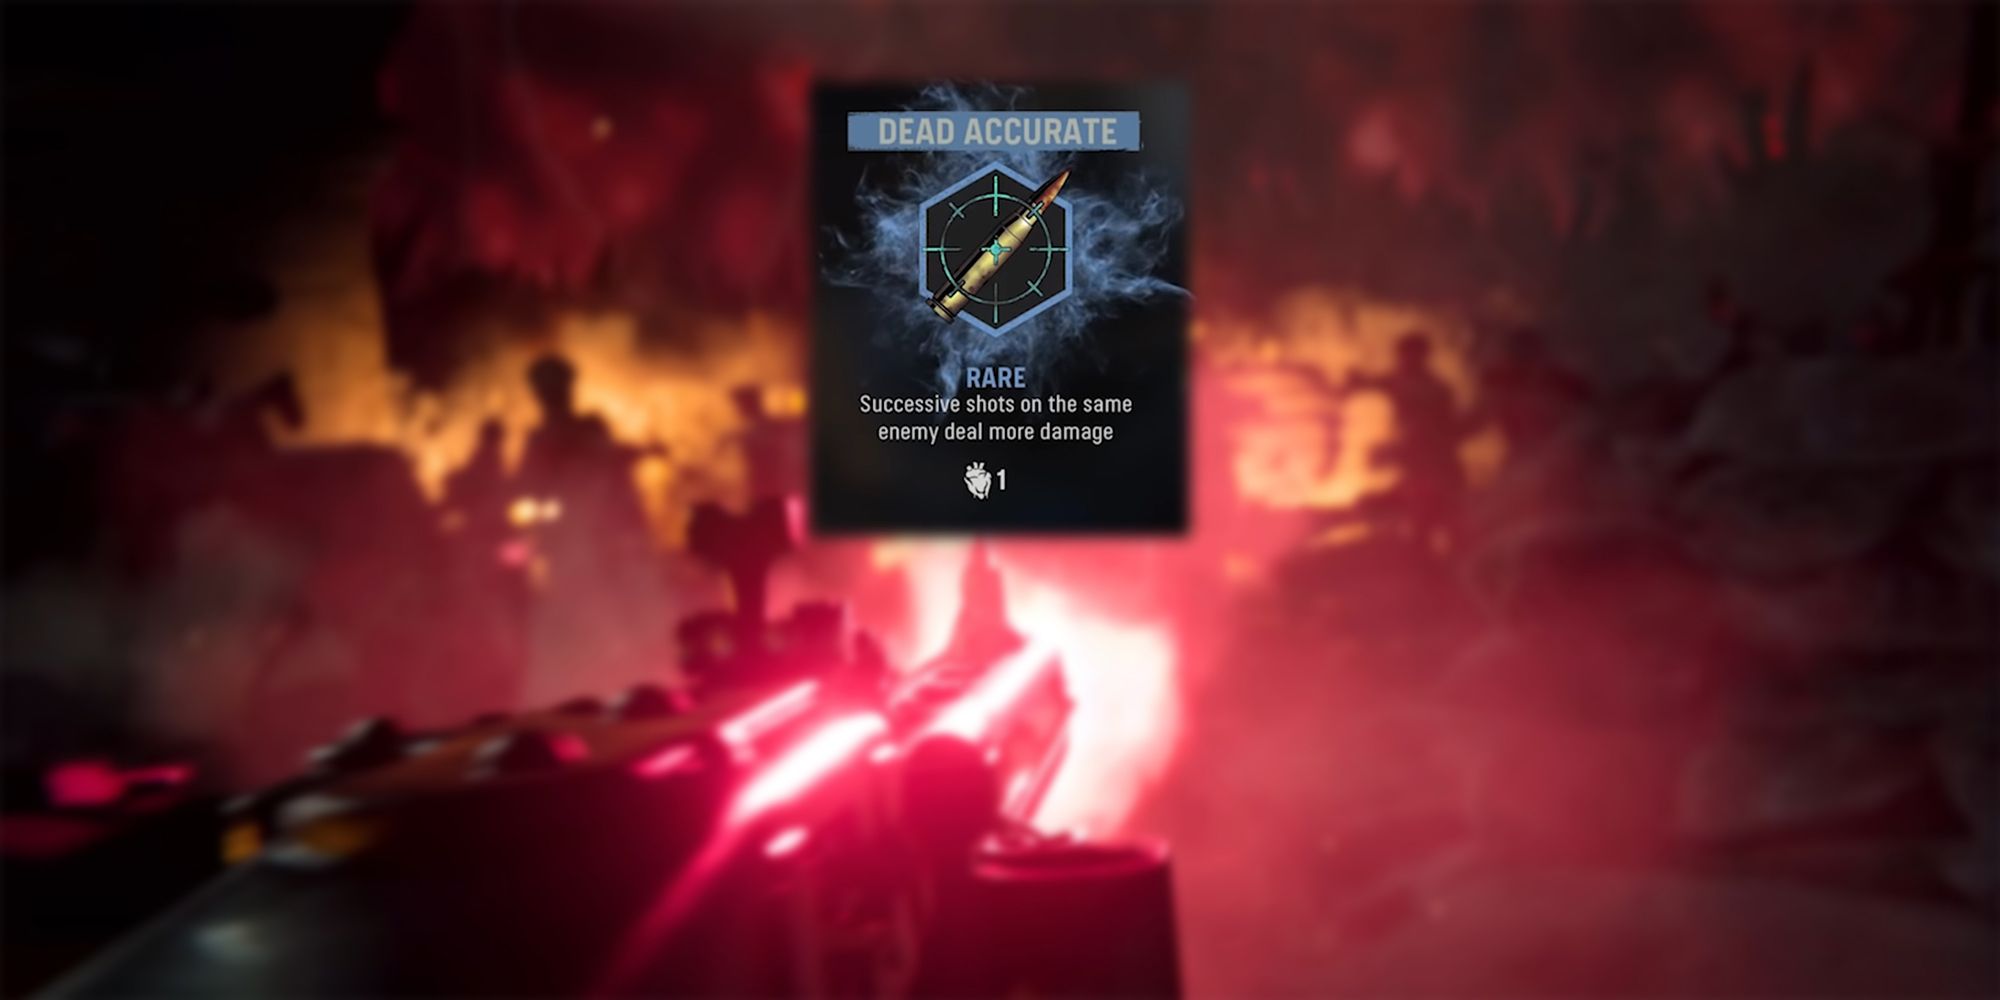 Call of Duty Vanguard Zombies - Dead Accurate Description In-Game Overlaid On Image Of Operator Firing Widely Into Zombies First Person From Zombies Trailer